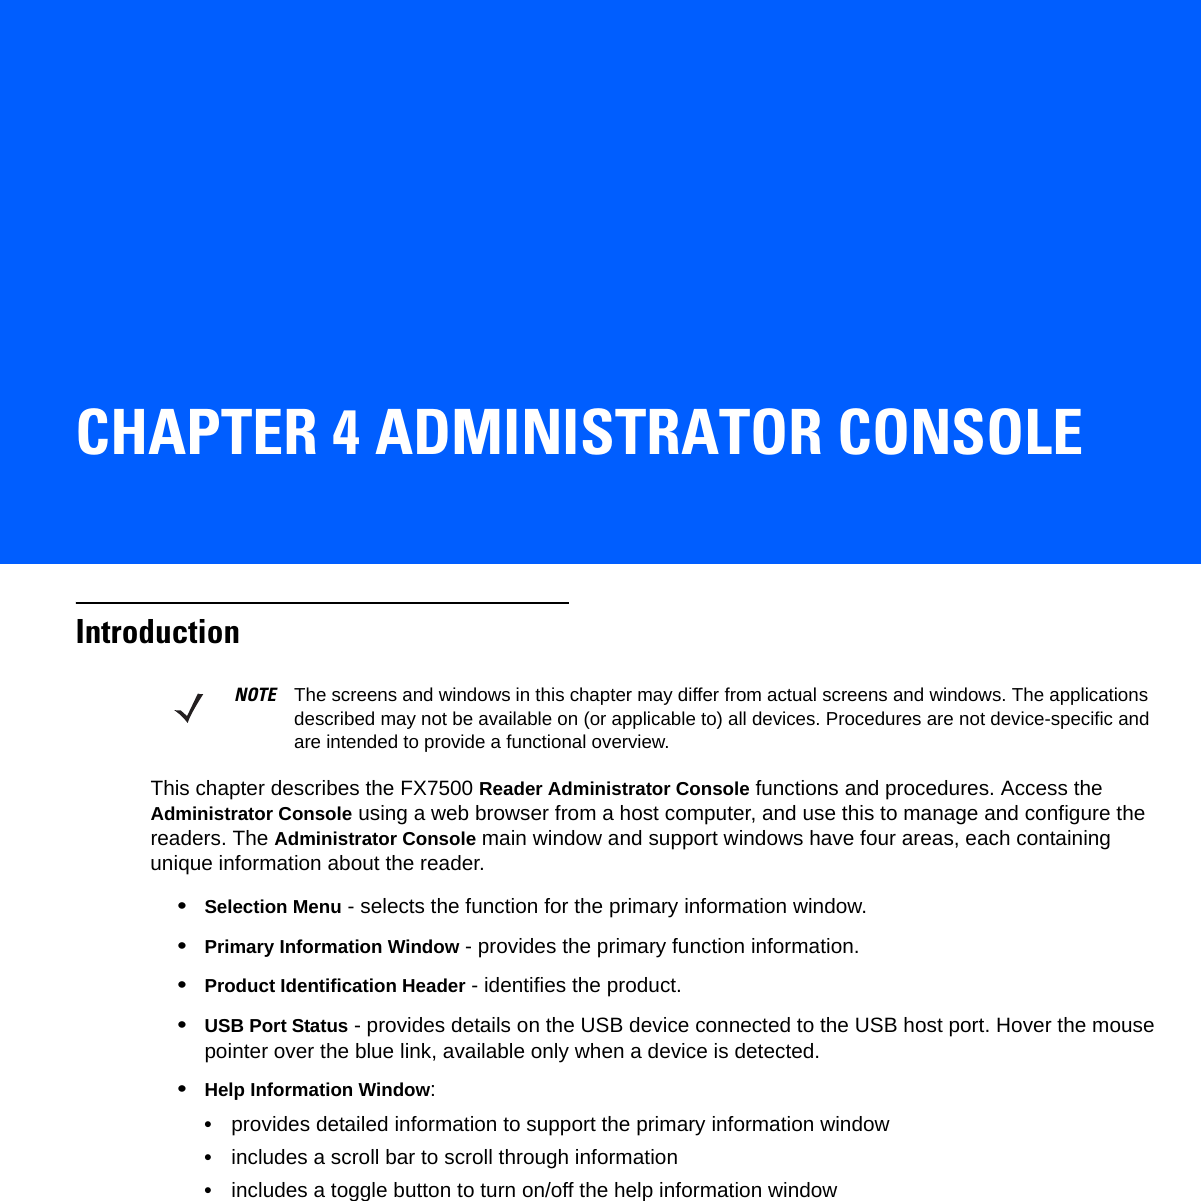 CHAPTER 4 ADMINISTRATOR CONSOLEIntroductionThis chapter describes the FX7500 Reader Administrator Console functions and procedures. Access the Administrator Console using a web browser from a host computer, and use this to manage and configure the readers. The Administrator Console main window and support windows have four areas, each containing unique information about the reader.•Selection Menu - selects the function for the primary information window.•Primary Information Window - provides the primary function information.•Product Identification Header - identifies the product.•USB Port Status - provides details on the USB device connected to the USB host port. Hover the mouse pointer over the blue link, available only when a device is detected.•Help Information Window:•provides detailed information to support the primary information window•includes a scroll bar to scroll through information•includes a toggle button to turn on/off the help information windowNOTE The screens and windows in this chapter may differ from actual screens and windows. The applications described may not be available on (or applicable to) all devices. Procedures are not device-specific and are intended to provide a functional overview.